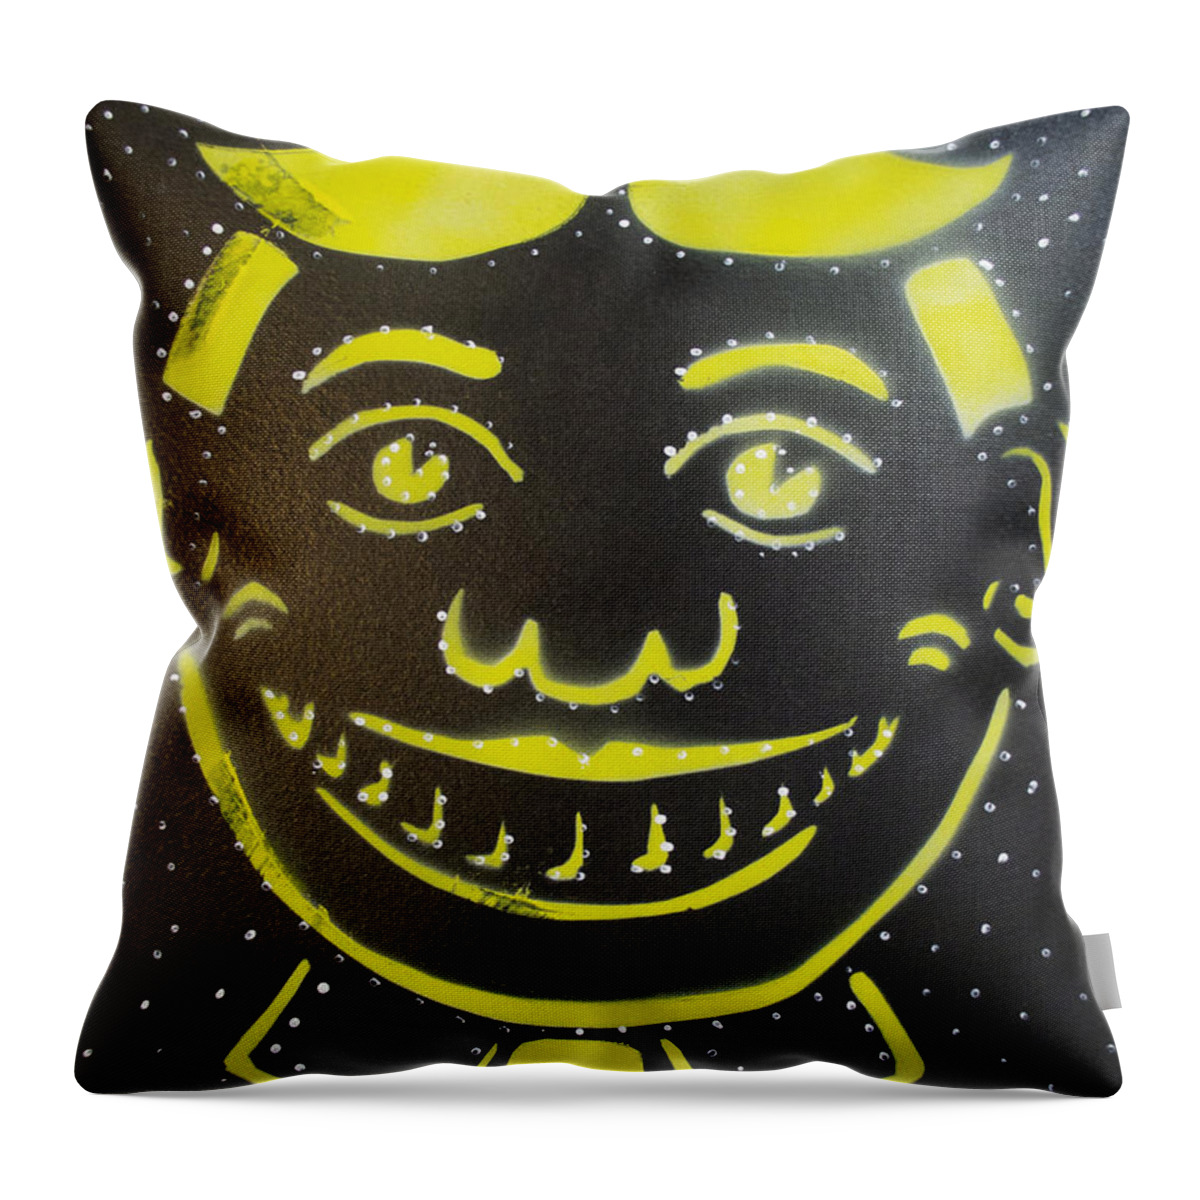 Tillie Of Asbury Park Throw Pillow featuring the painting Constellation Tillie by Patricia Arroyo